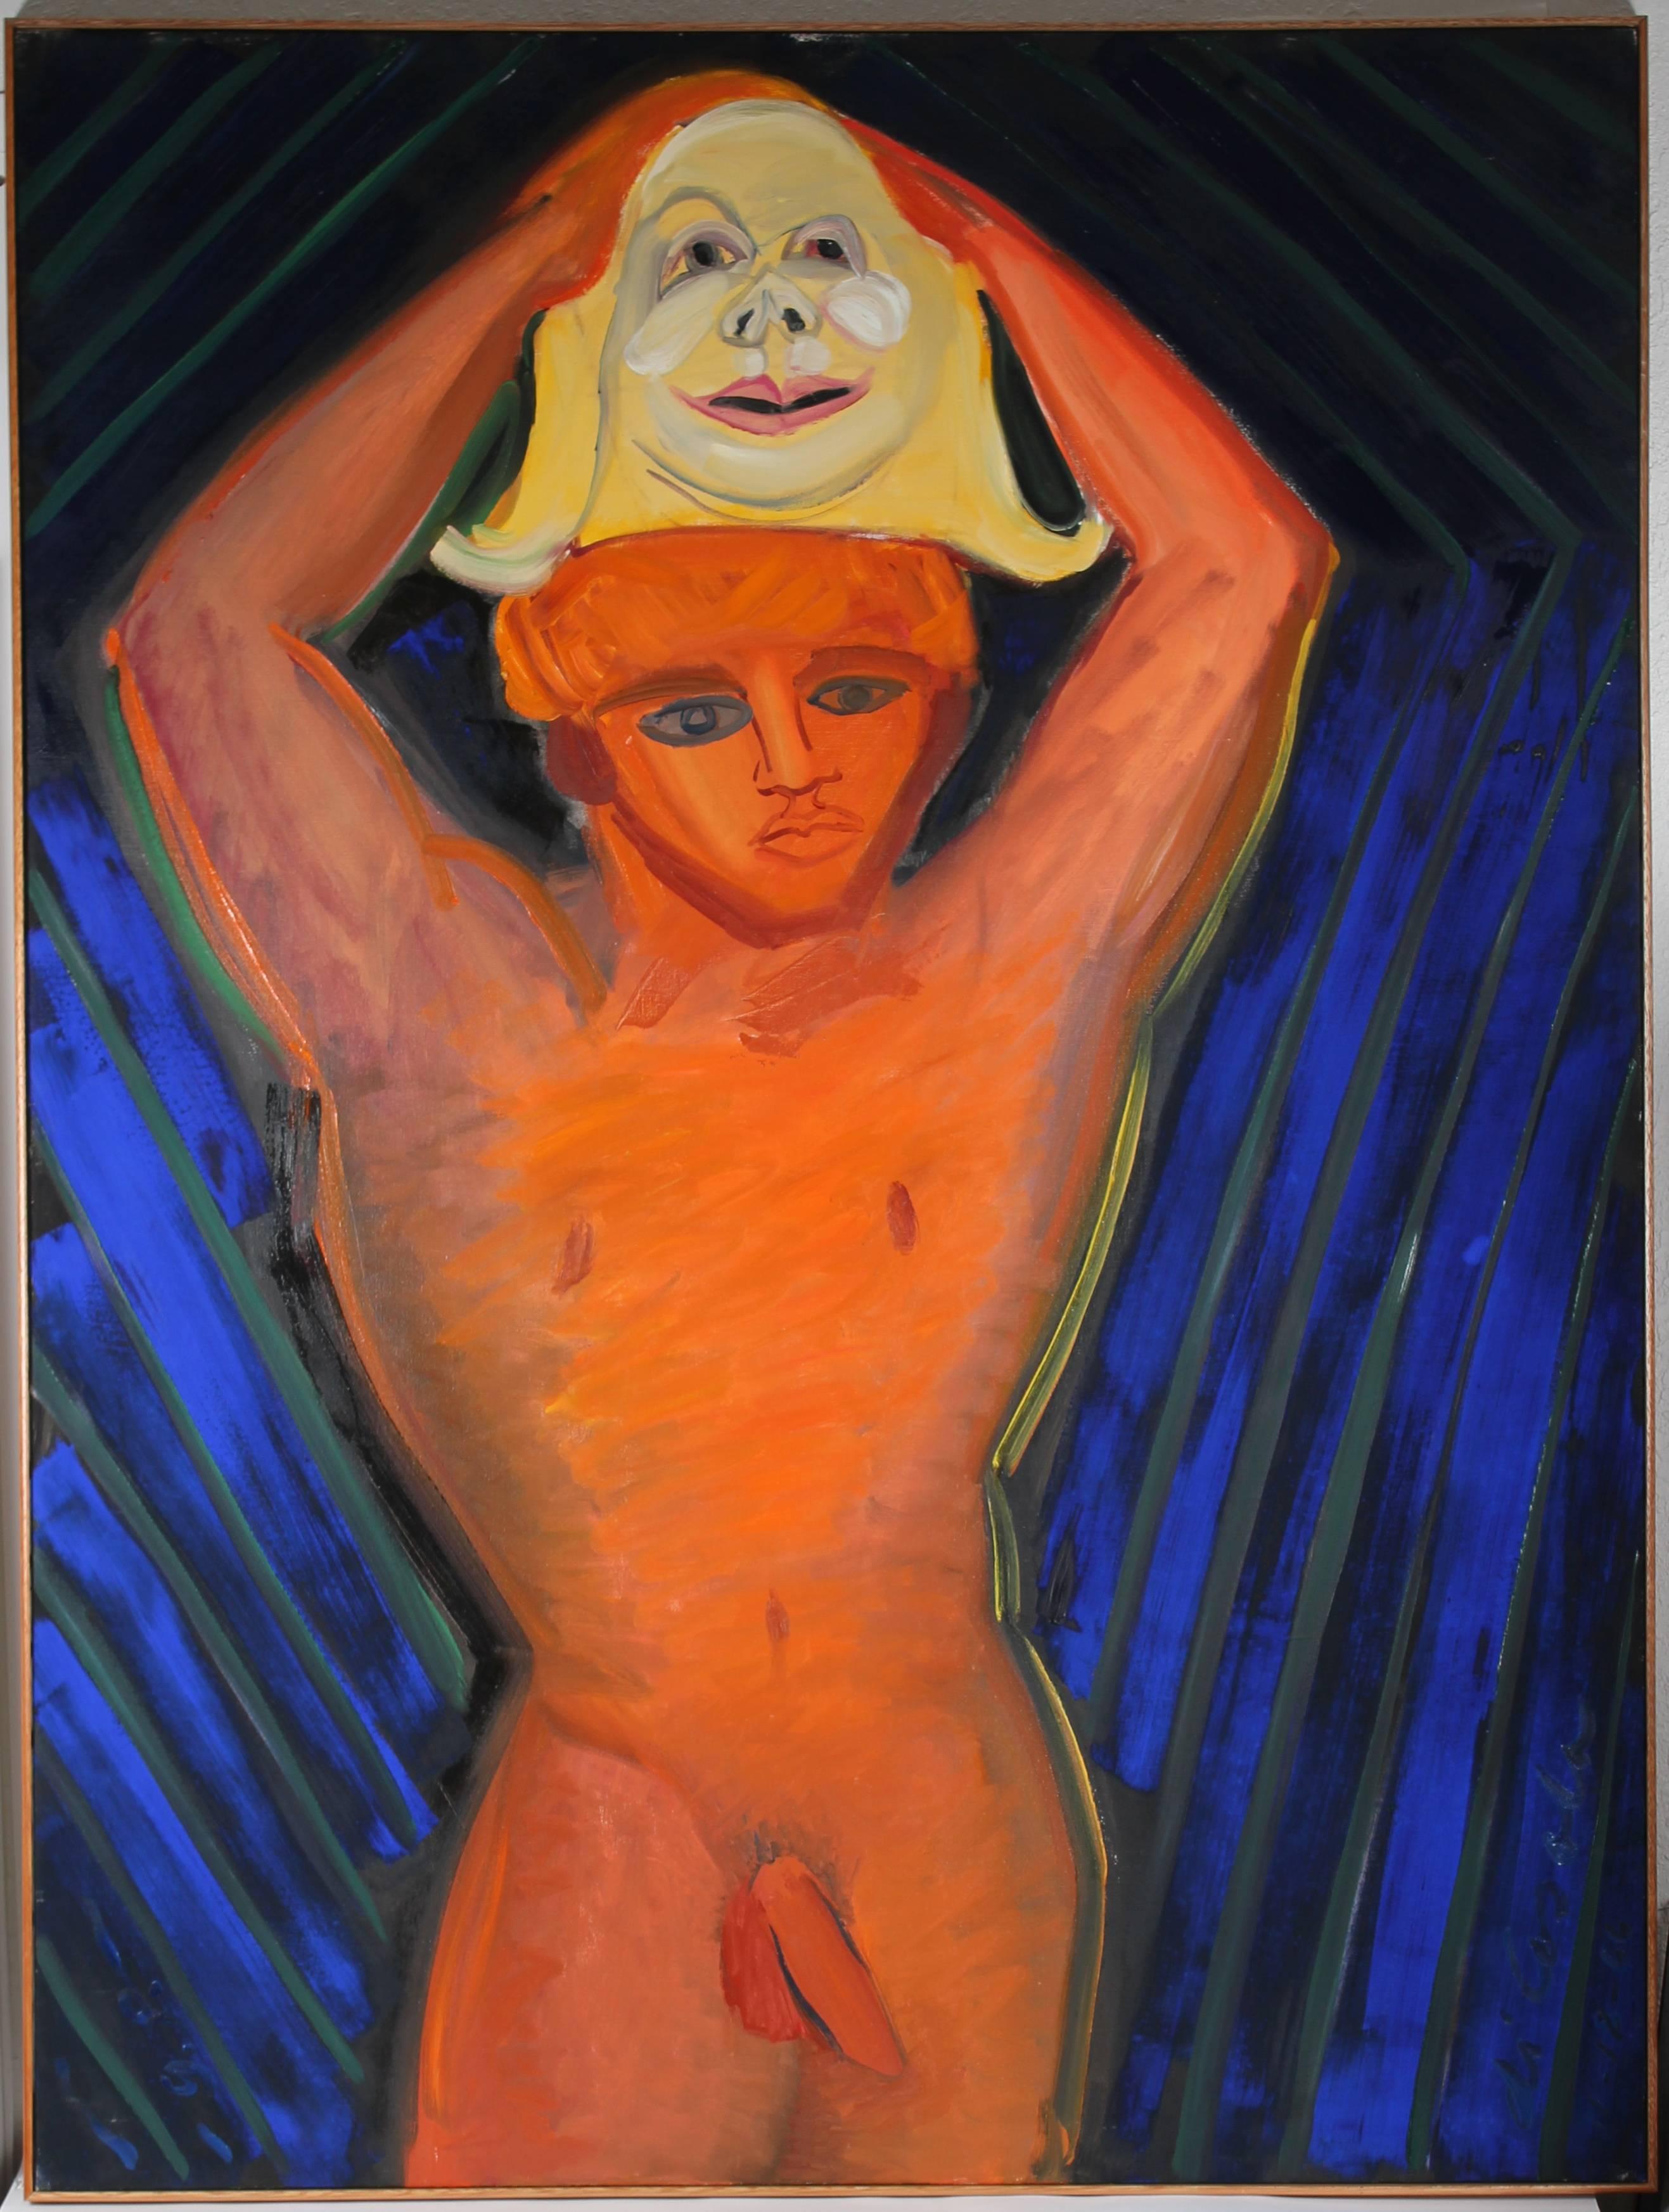 Michael di Cosola Nude Painting - Male Nude with Mask, Oil on Canvas, 1966